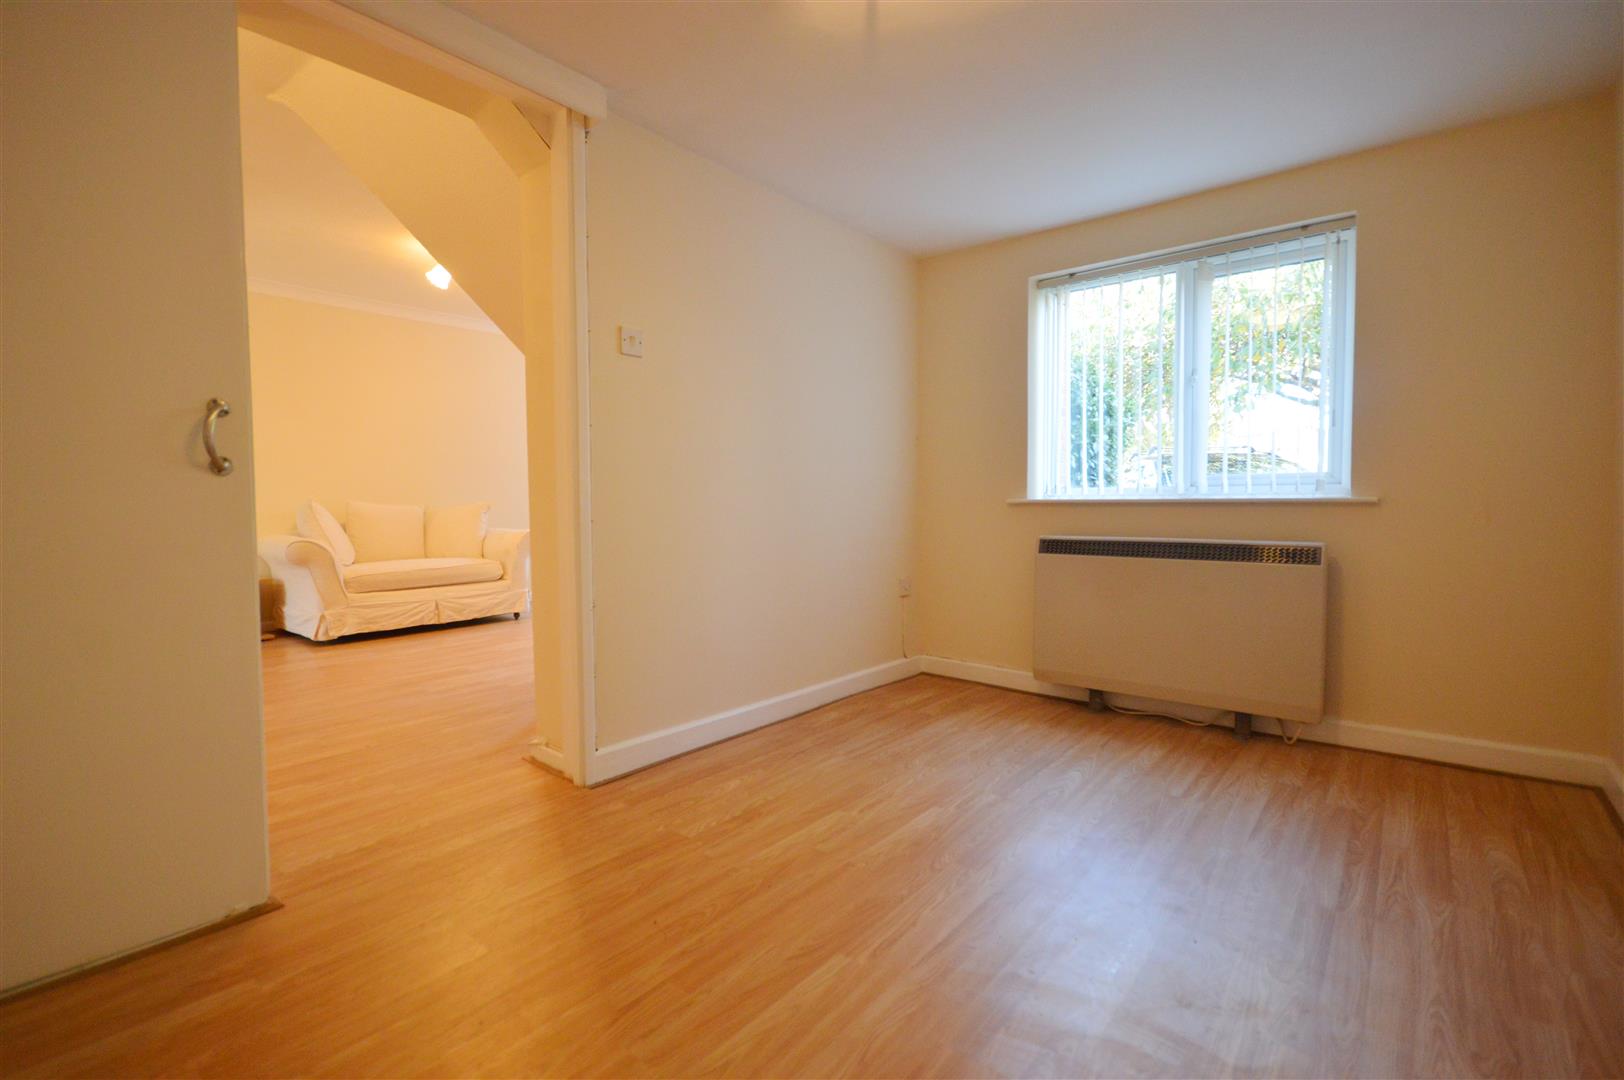 3 bed semi-detached for sale in Leominster 6